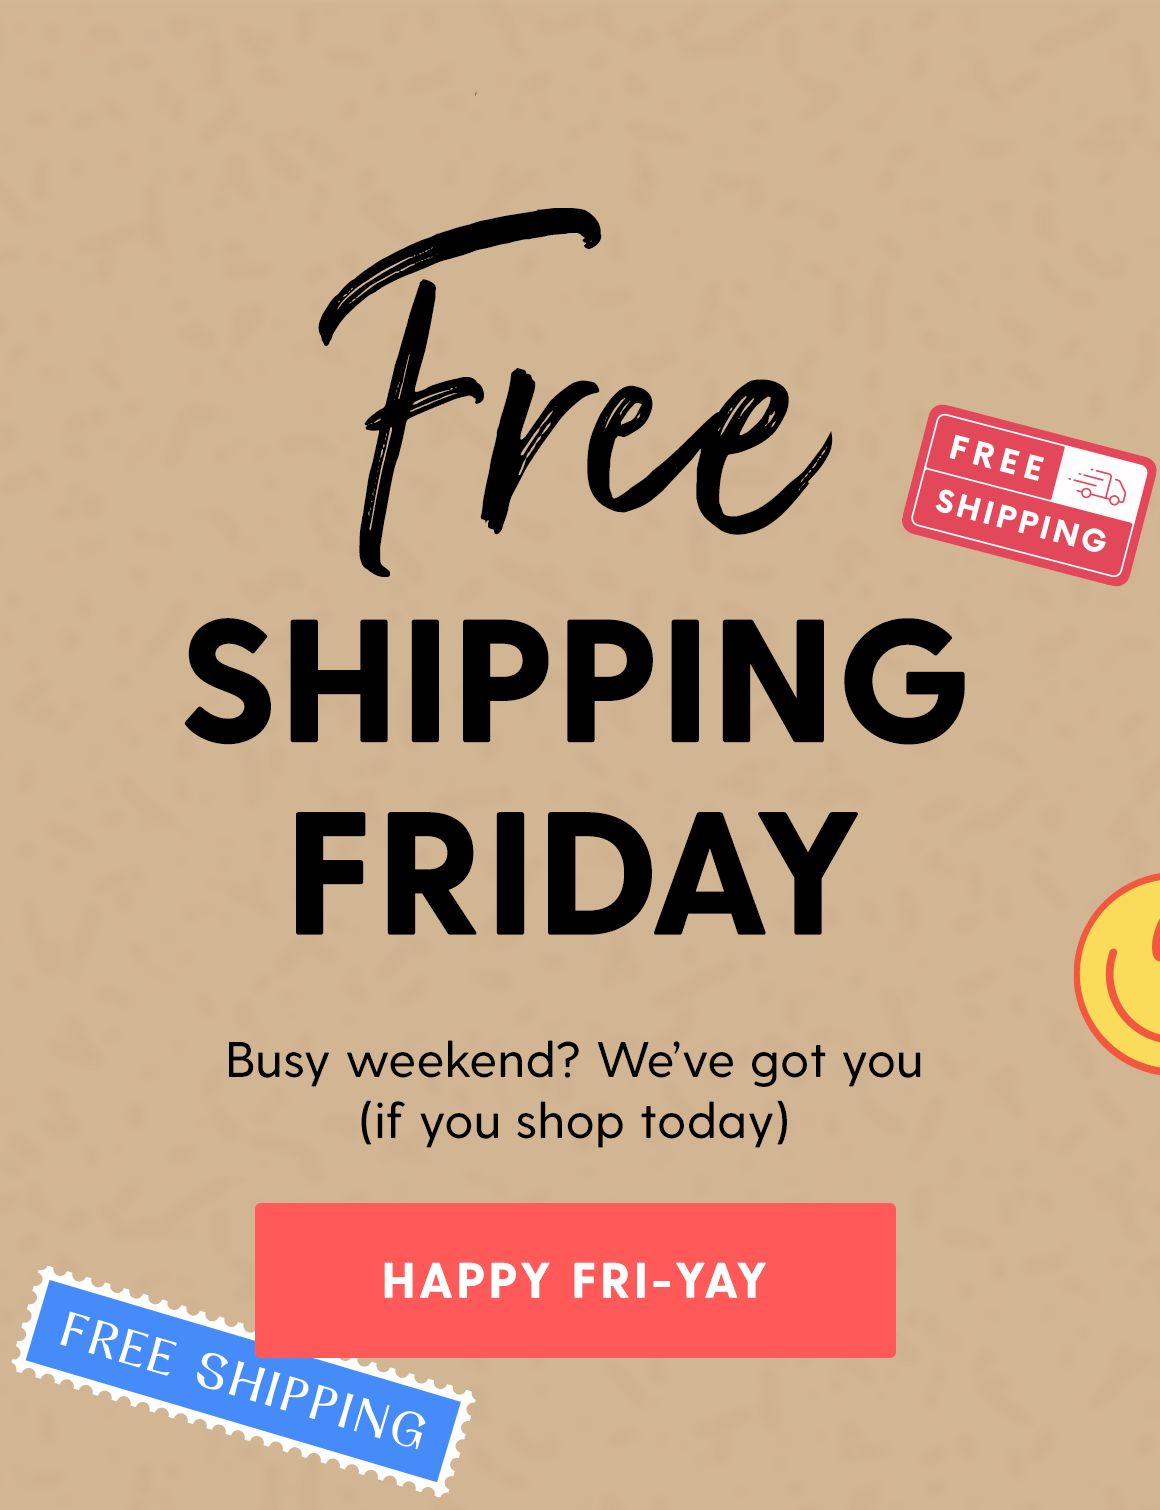 Free SHIPPING FRIDAY. Busy weekend? We've got you (if you shop today). HAPPY FRI-YAY.